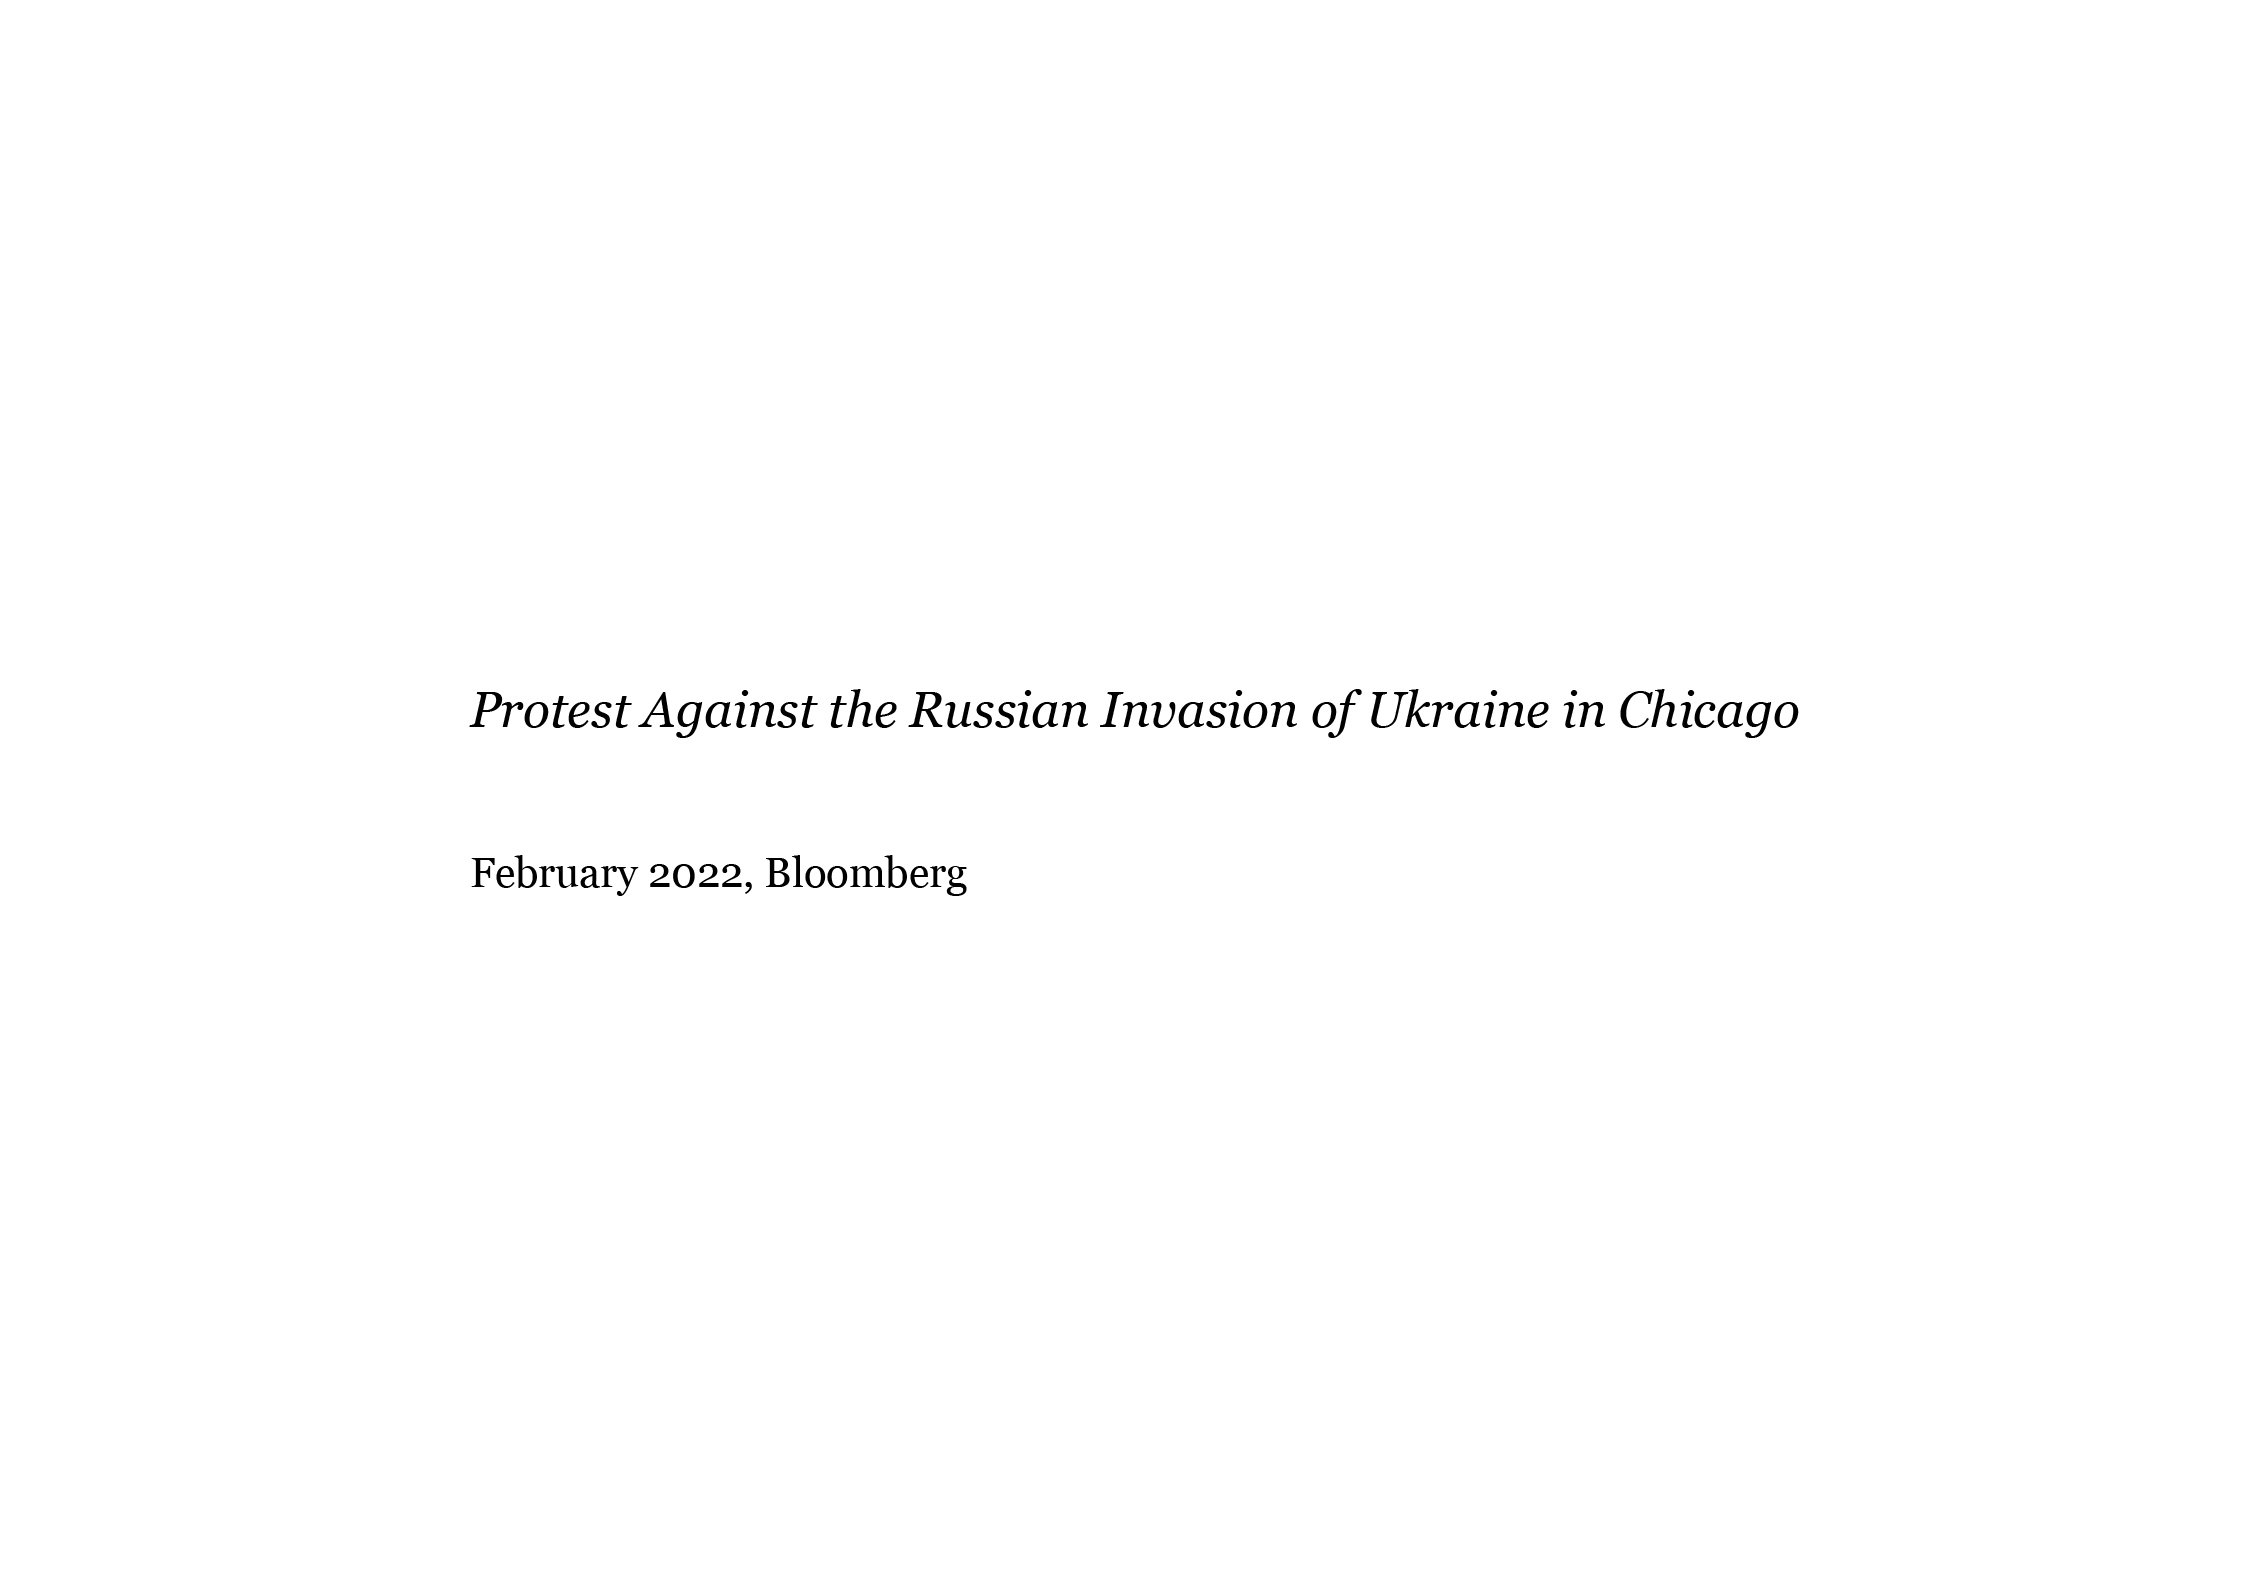  Protest Against the Russian Invasion of Ukraine in Chicago  Bloomberg, 2022  